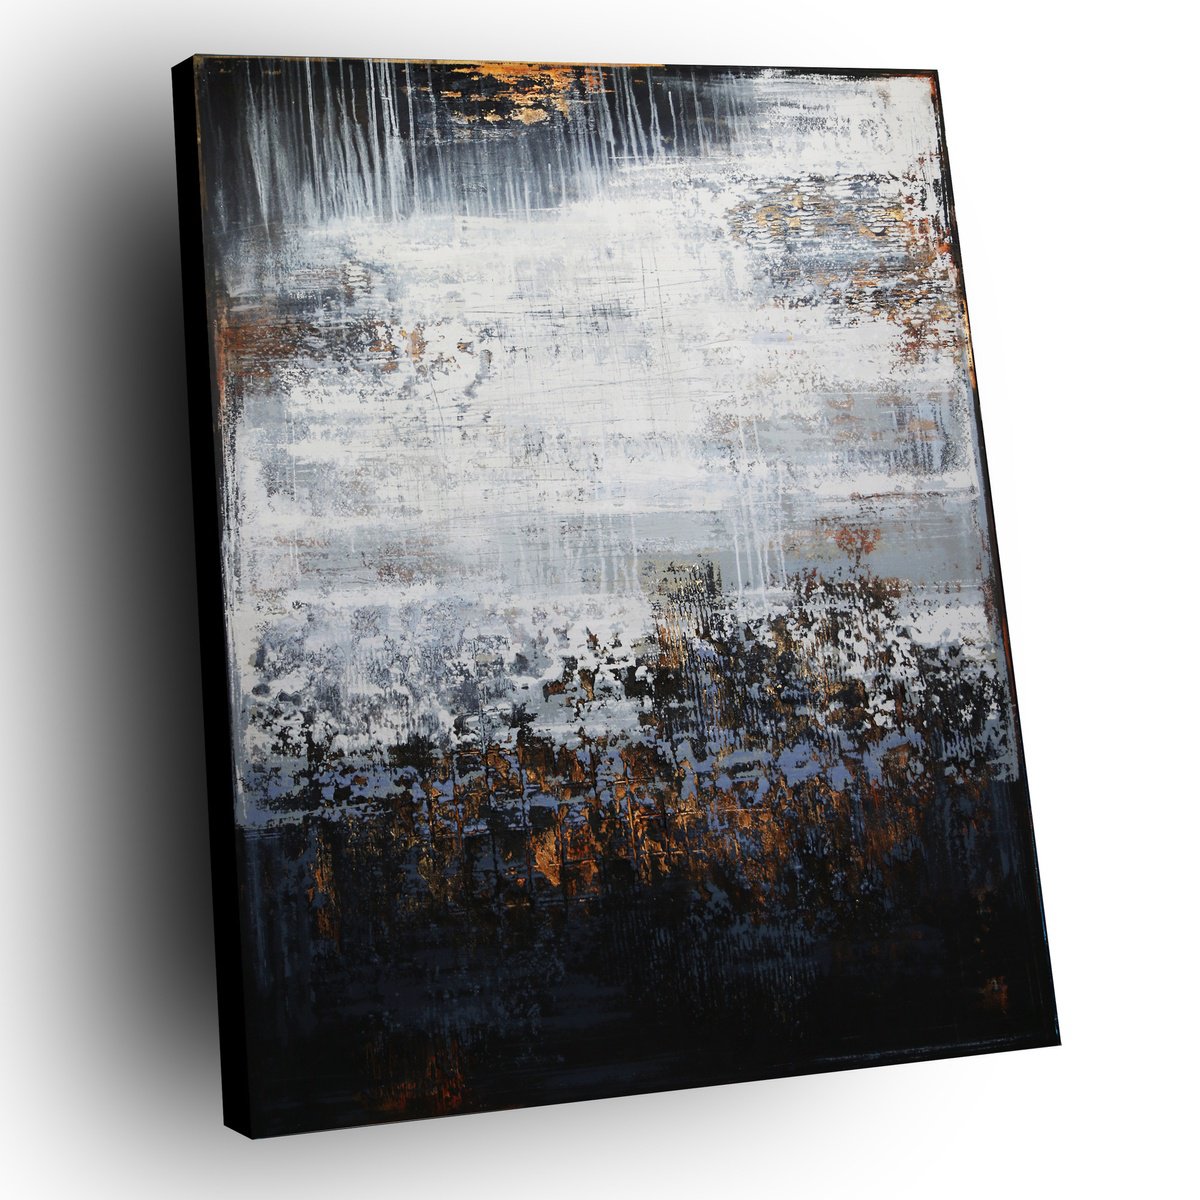 BETWEEN NIGHT AND DAY - 150 x 120 CM - TEXTURED ACRYLIC PAINTING ON CANVAS * INDUSTRIAL ST... by Inez Froehlich